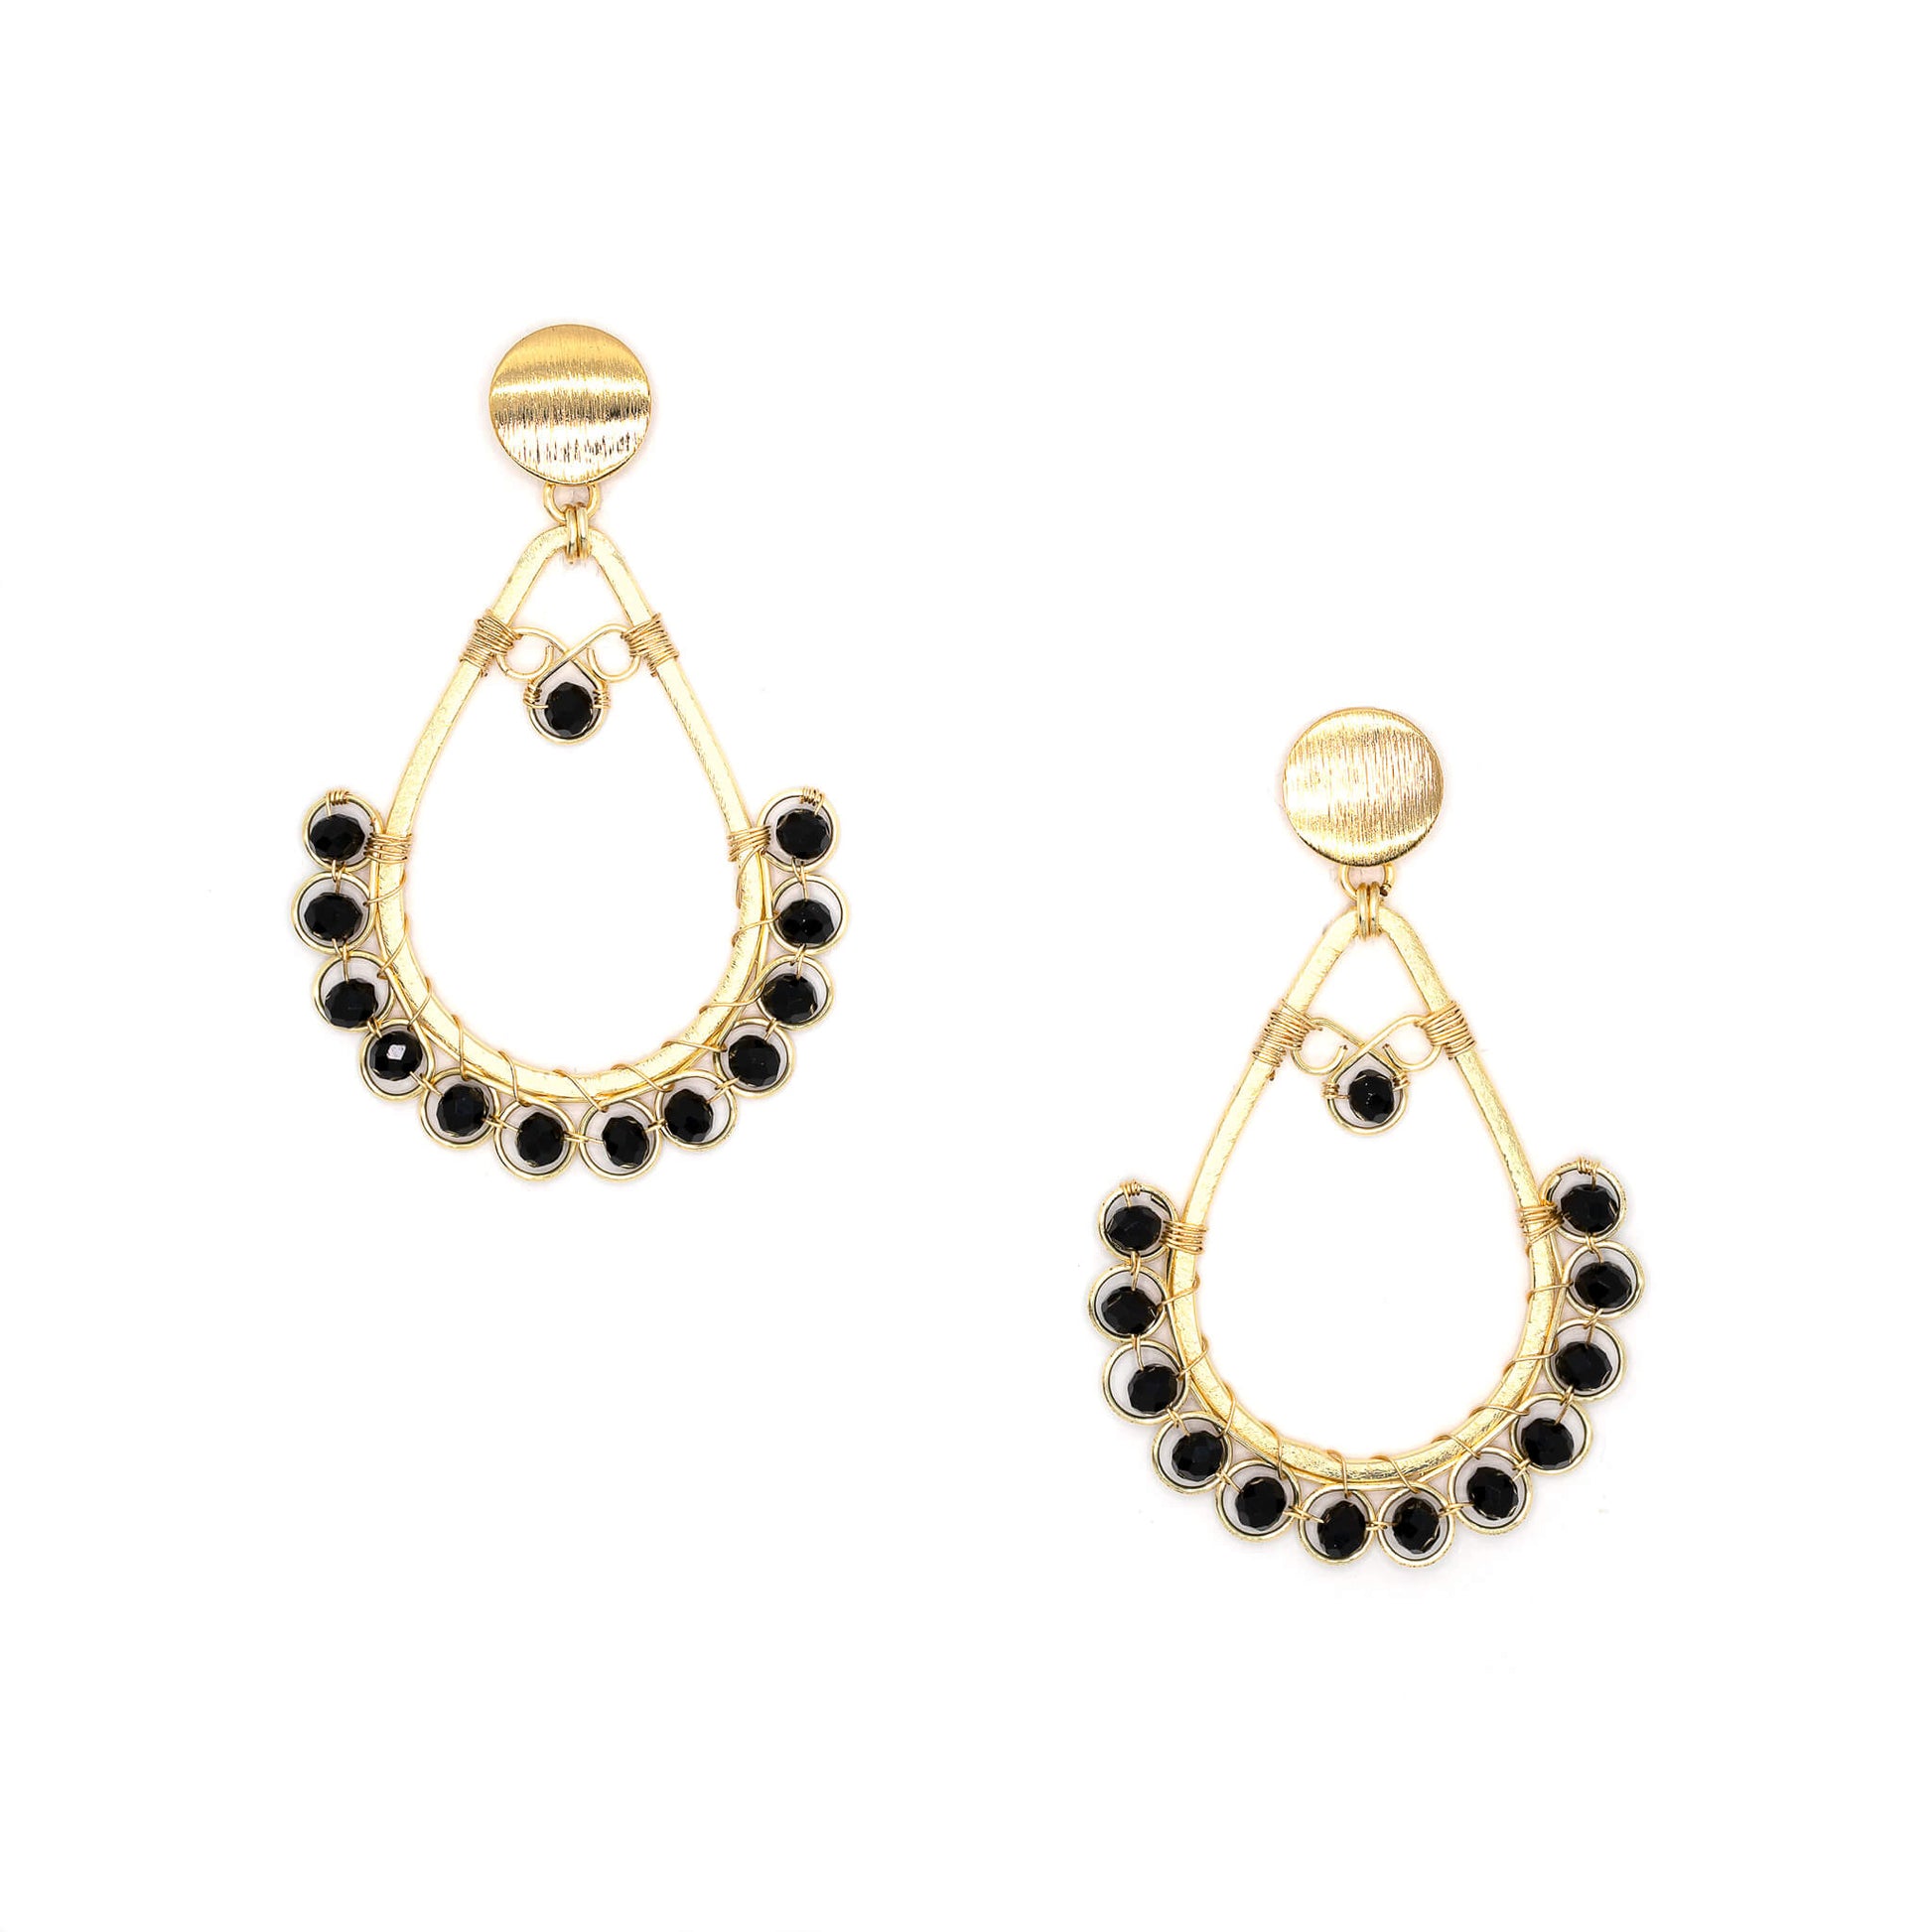 Amara II Earrings are 3 inches long. Gold teardrop with beads Earrings. Gold and Black earrings. Handmade with Gold-plated wire and Faceted Crystal beads. Simple Wire Wrapped Earrings.